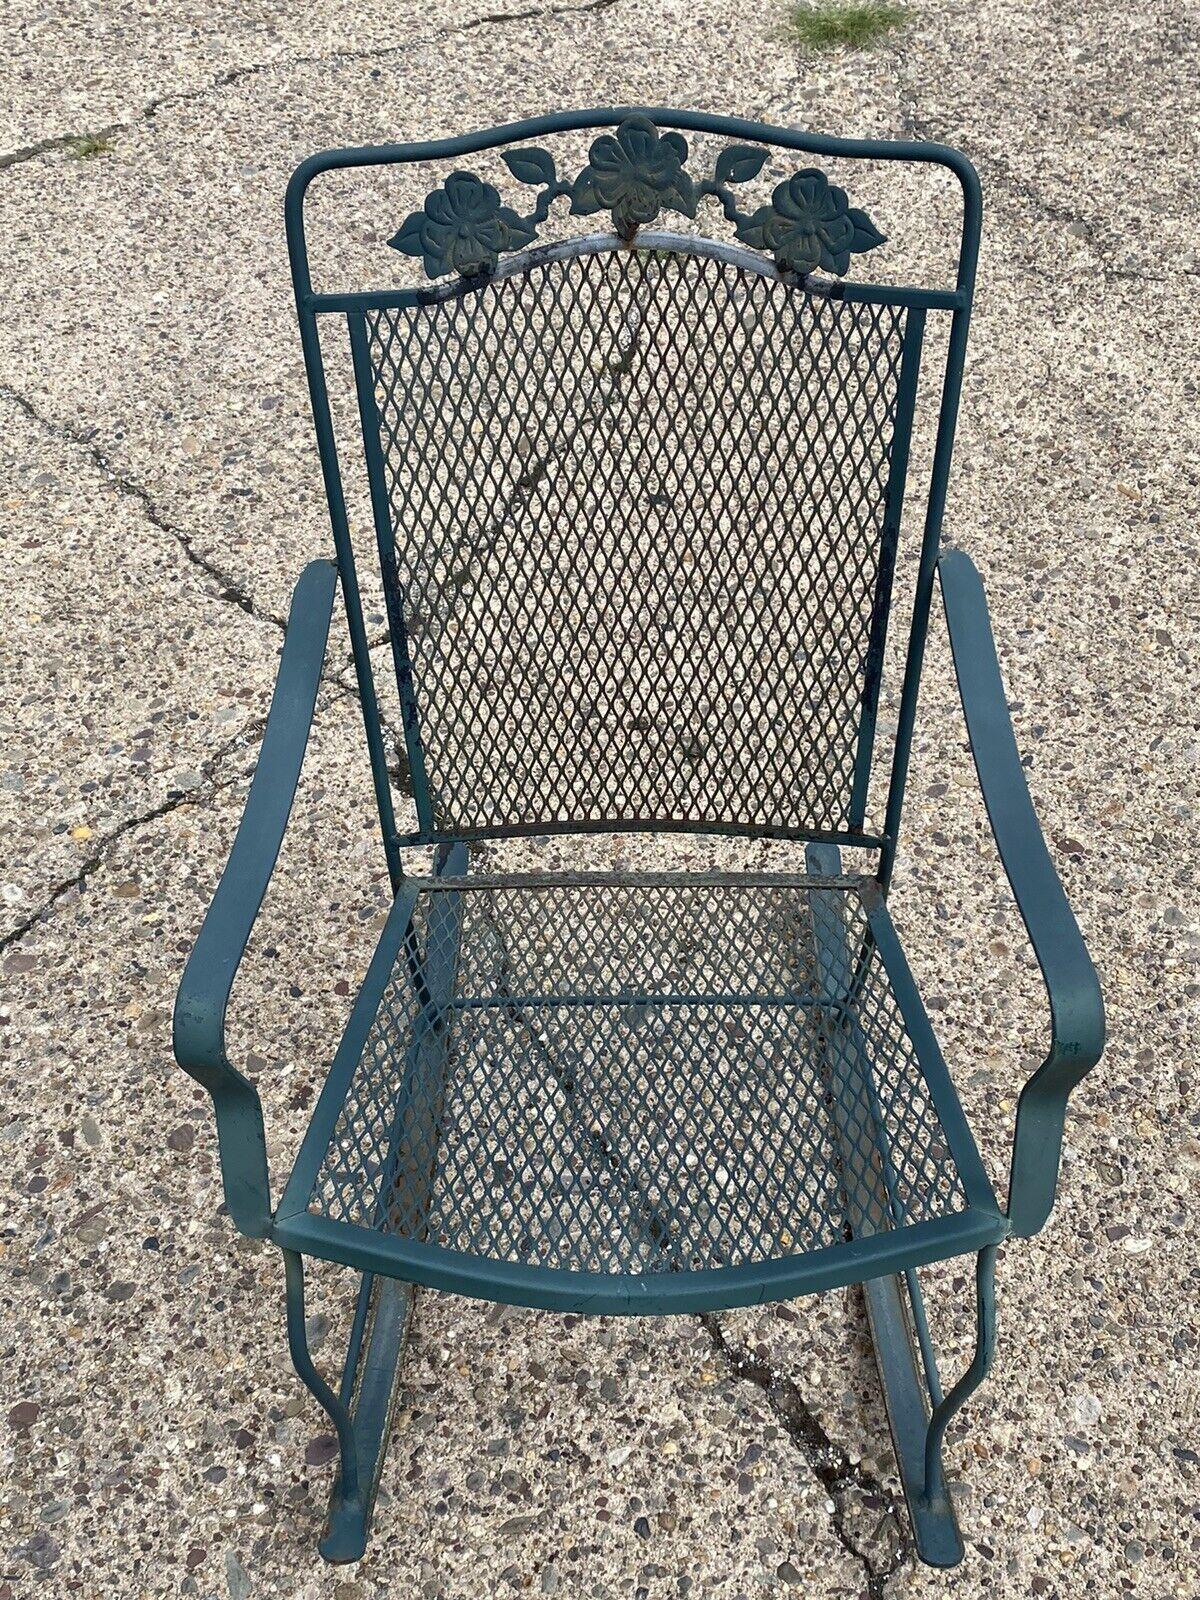 Vintage Wrought Iron Victorian Style Green Garden Patio Rocker Rocking Chair For Sale 4